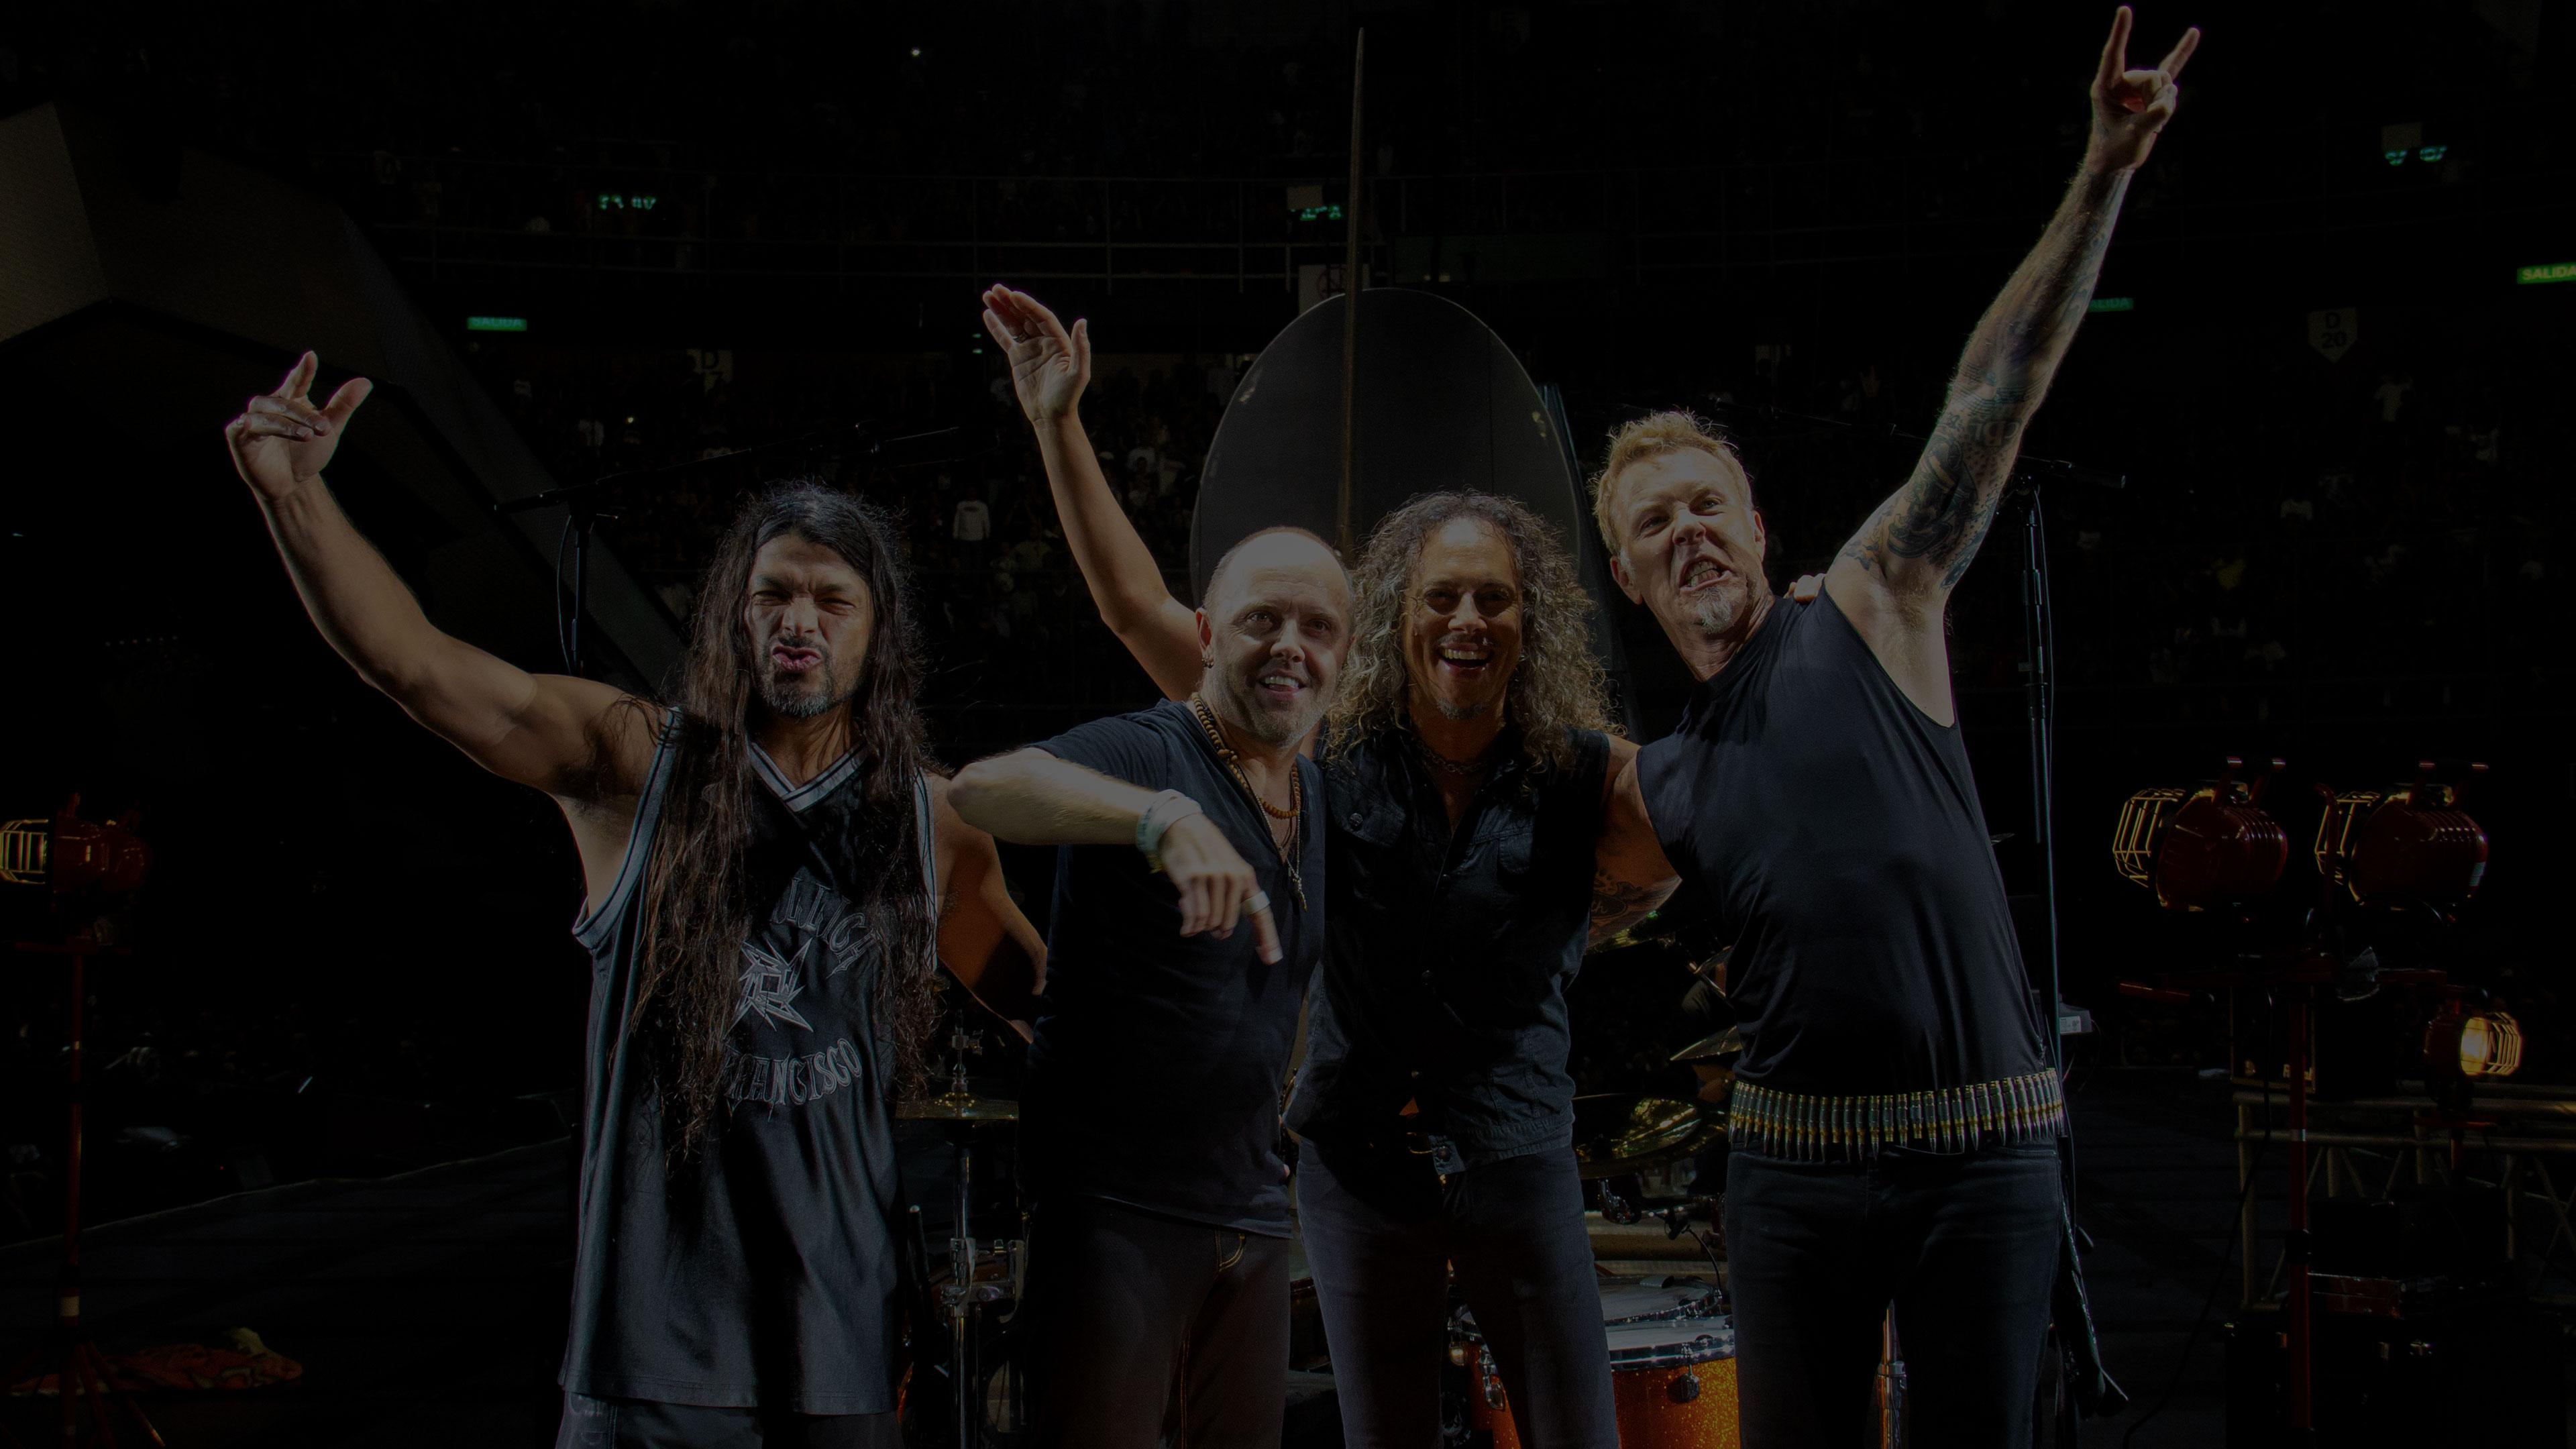 Banner Image for the photo gallery from the gig in Mexico City, Mexico shot on August 4, 2012